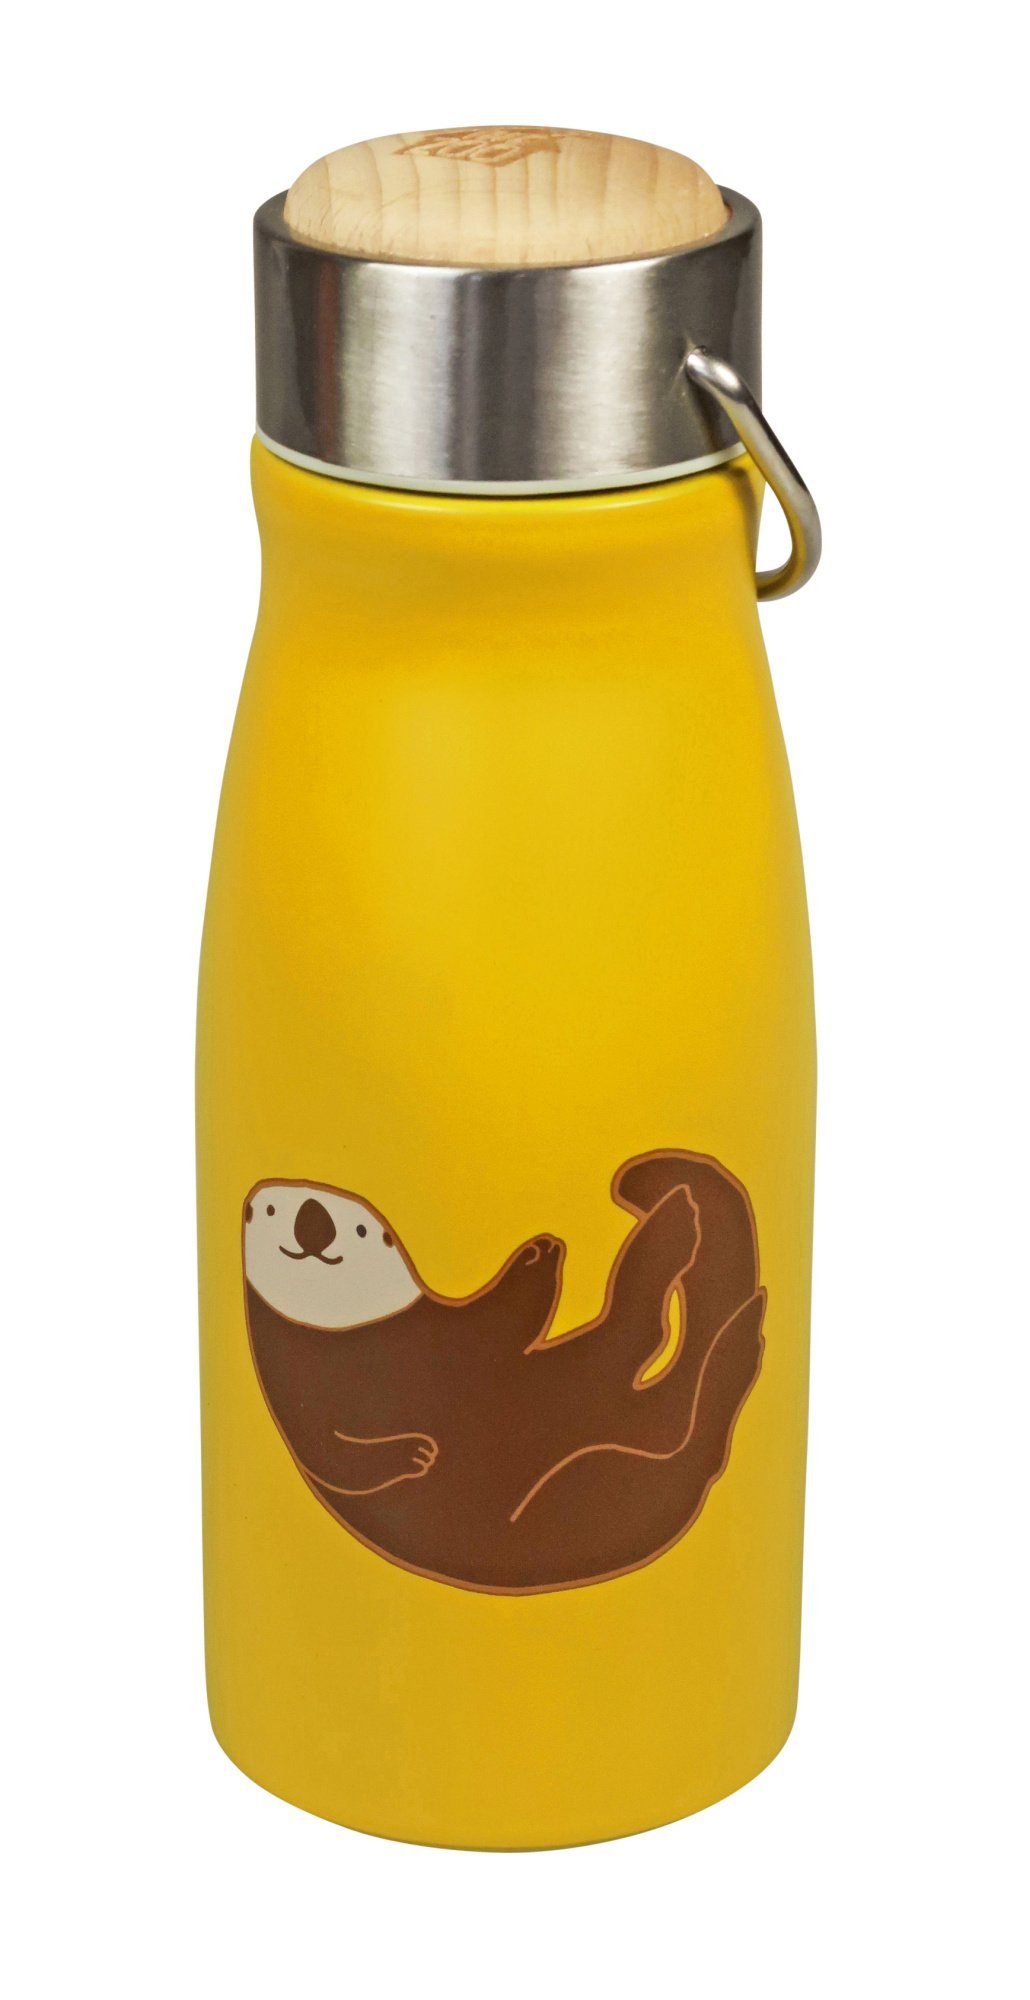 Capventure Trinkflasche The Zoo Edelstahl Kinder Isolierflasche Thermoskanne Thermosflasche Seeotter